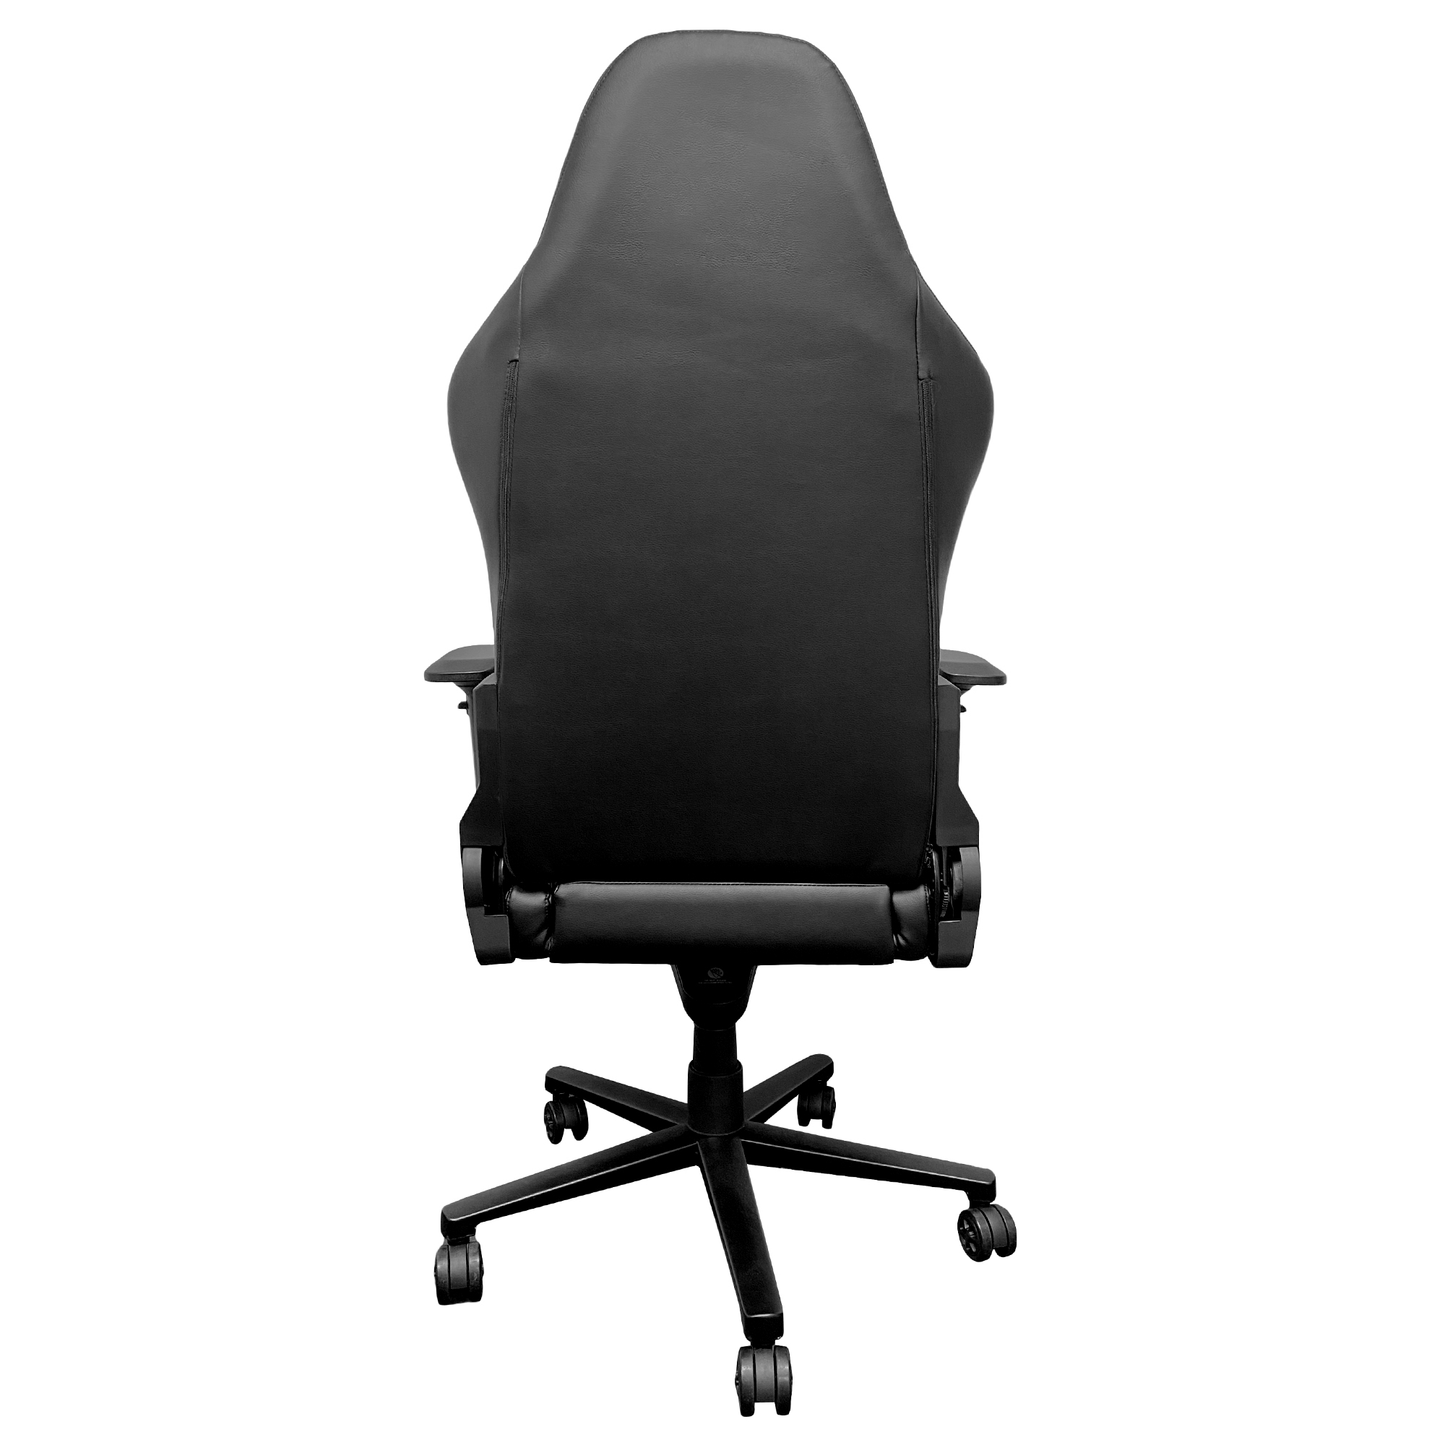 Xpression Pro Gaming Chair with Vanderbilt Commodores Primary